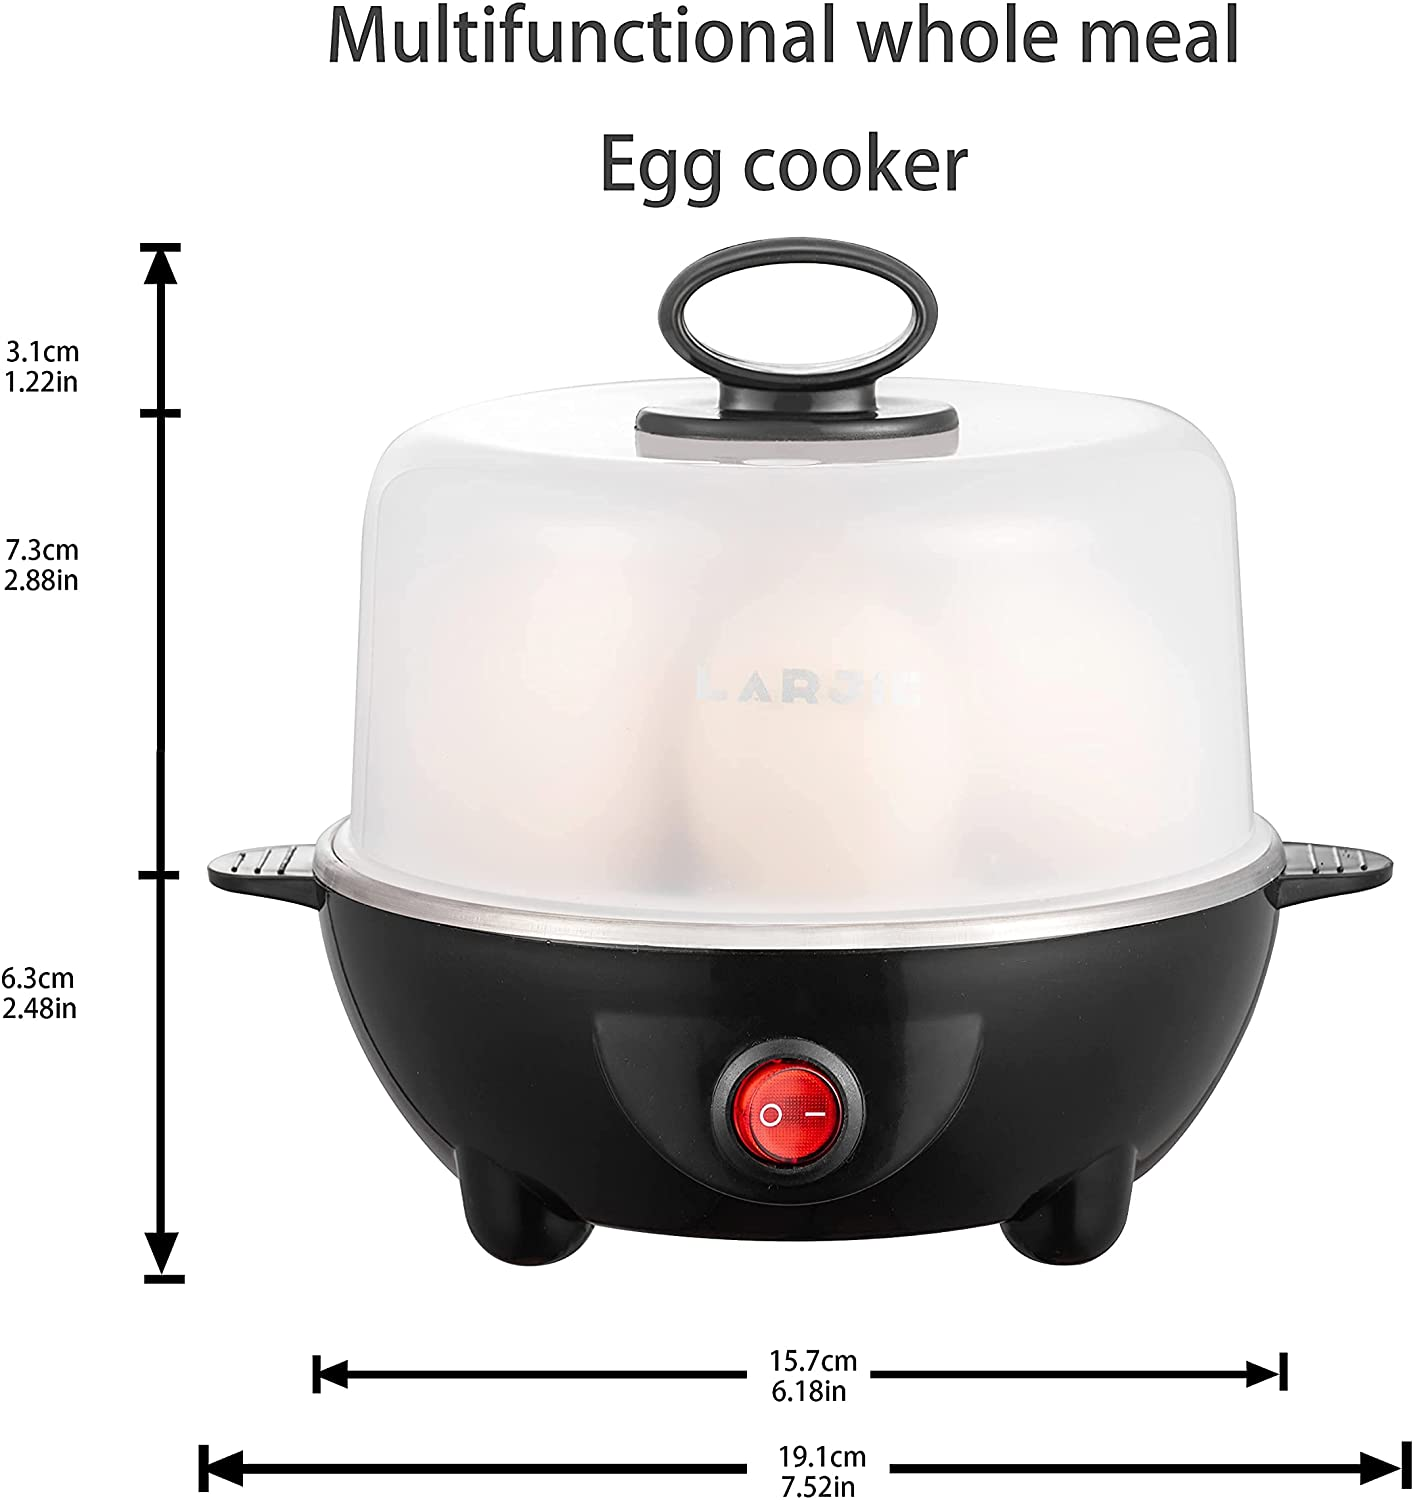 Electric Egg Boiler Cooker Rapid Poacher 1 or 7 Capacity Soft Medium Hard Boiled or Poached for Hard Boiled Scrambled Eggs or Omelets Steamed Vegetables Seafood W/Auto Shut off Feature Black